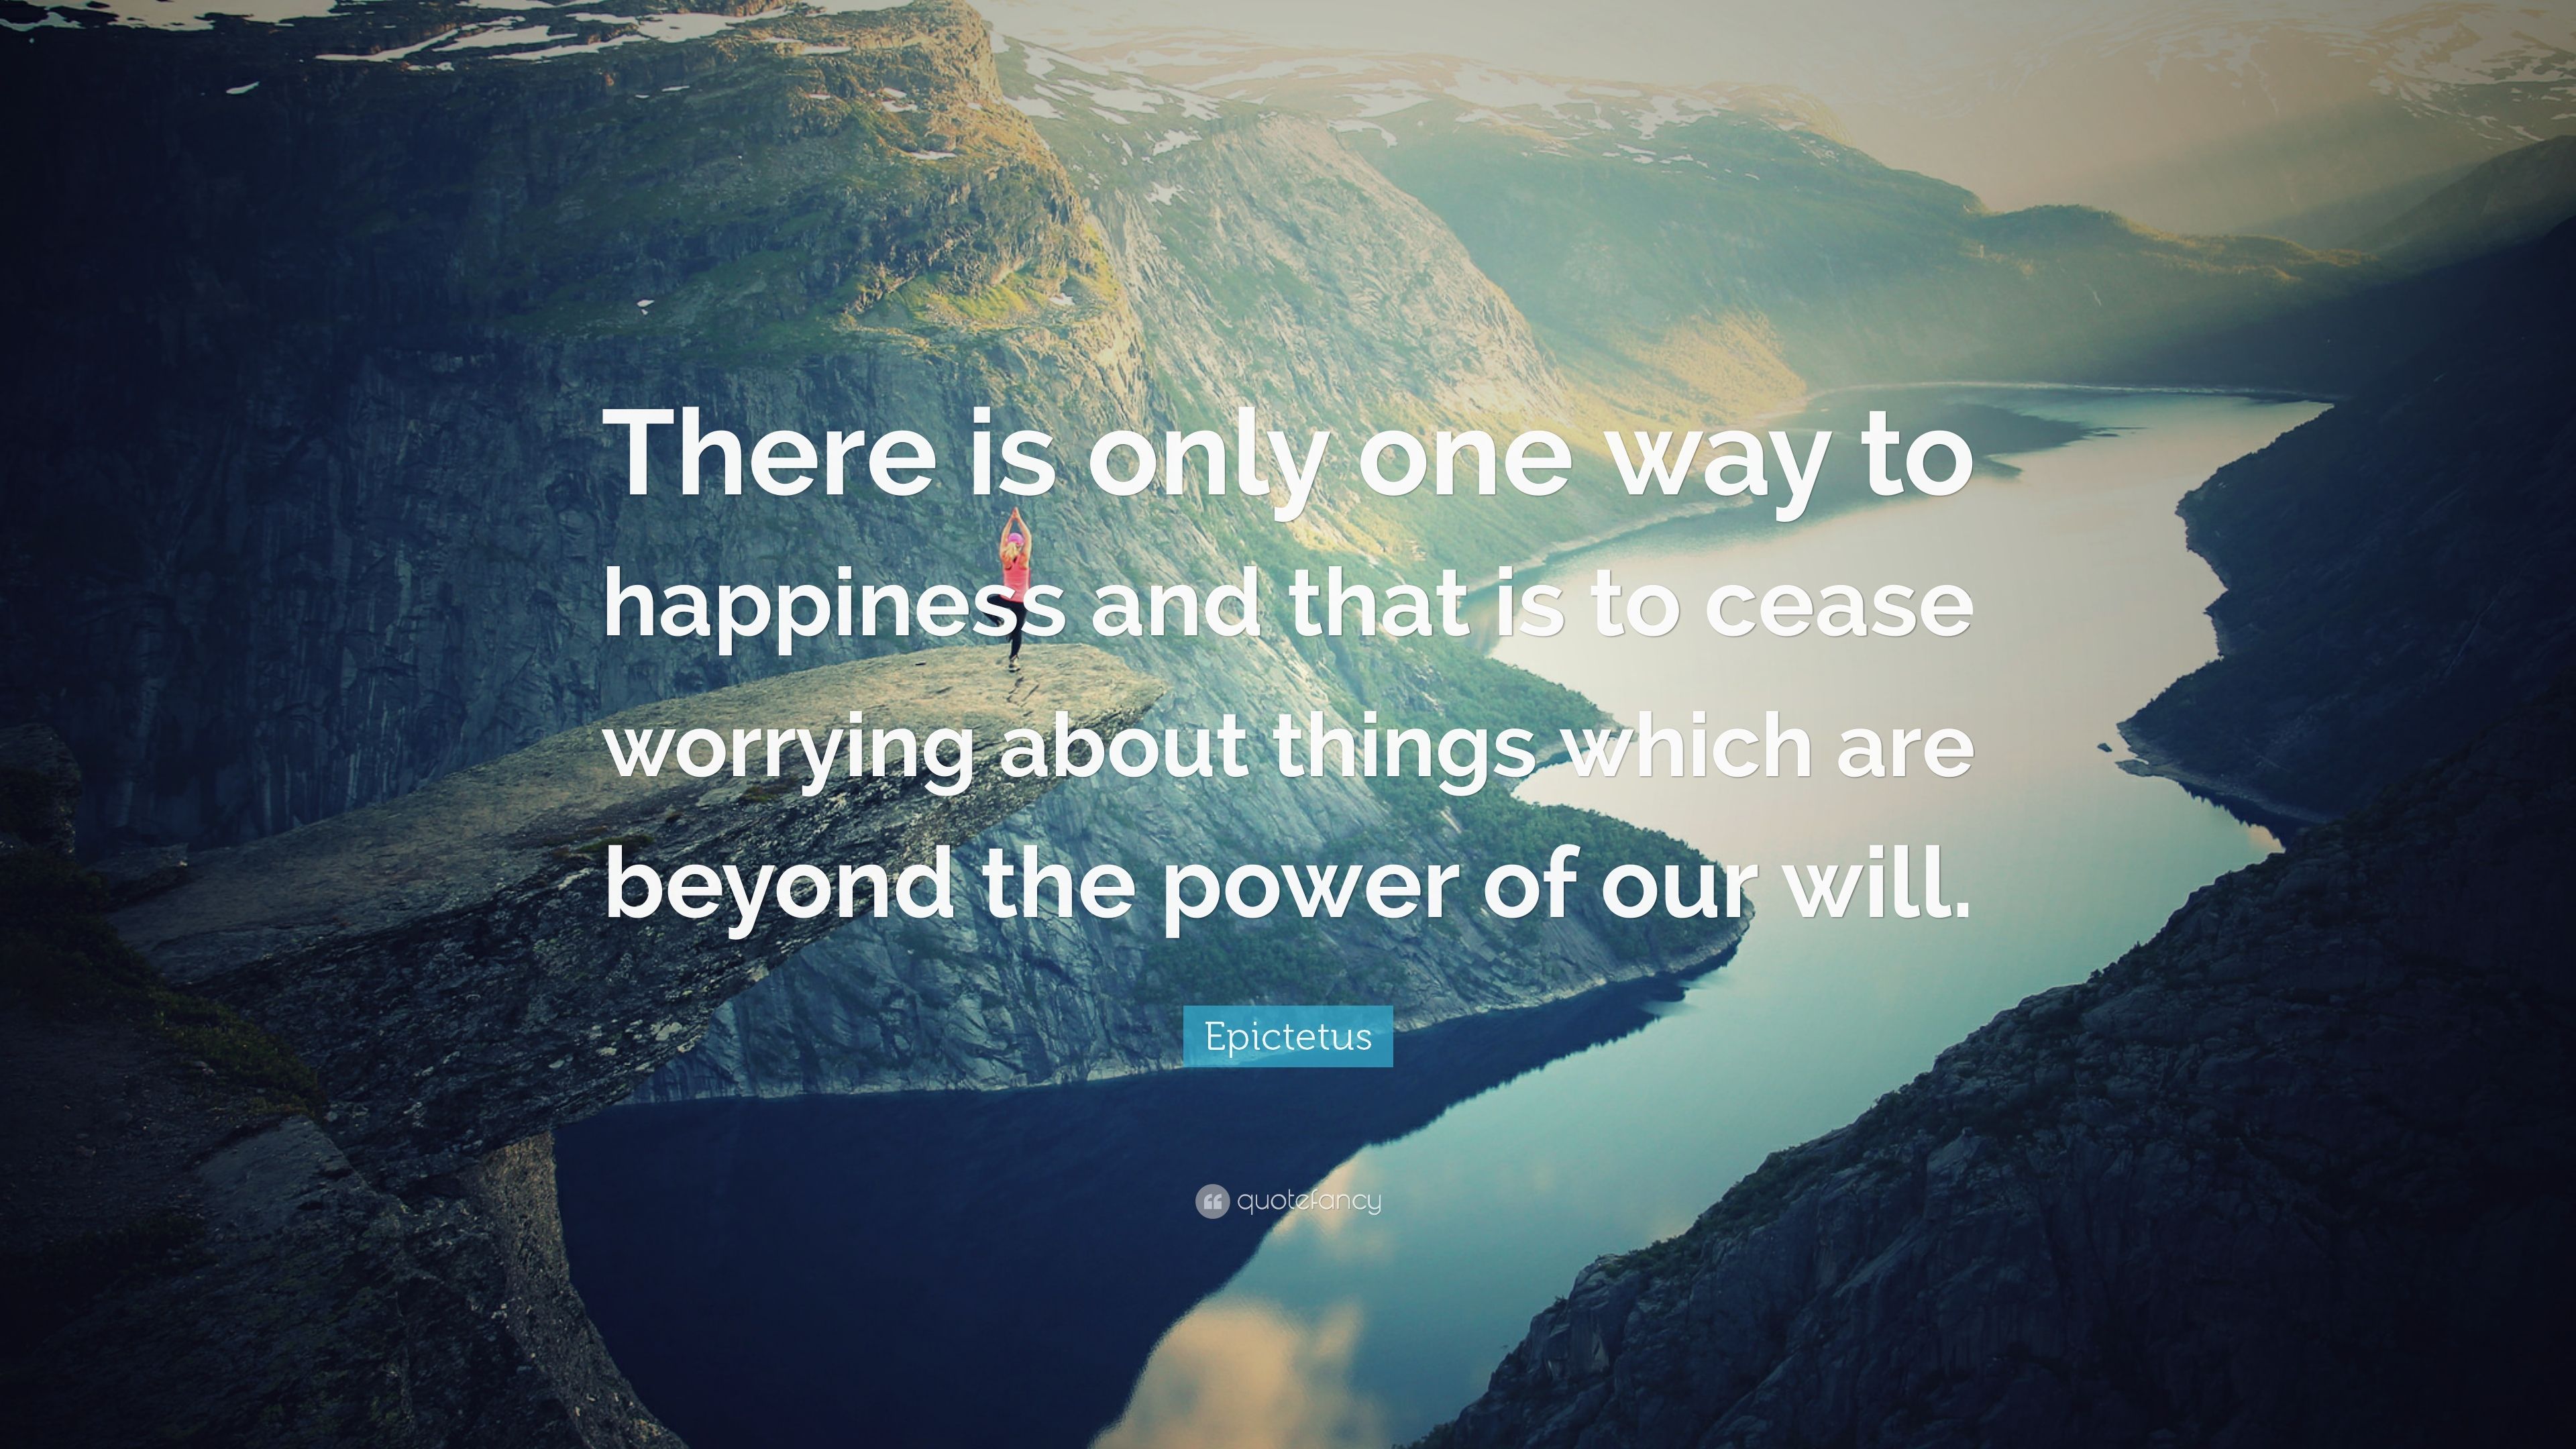 Epictetus Quote: “There is only one way to happiness and that is to cease worrying about